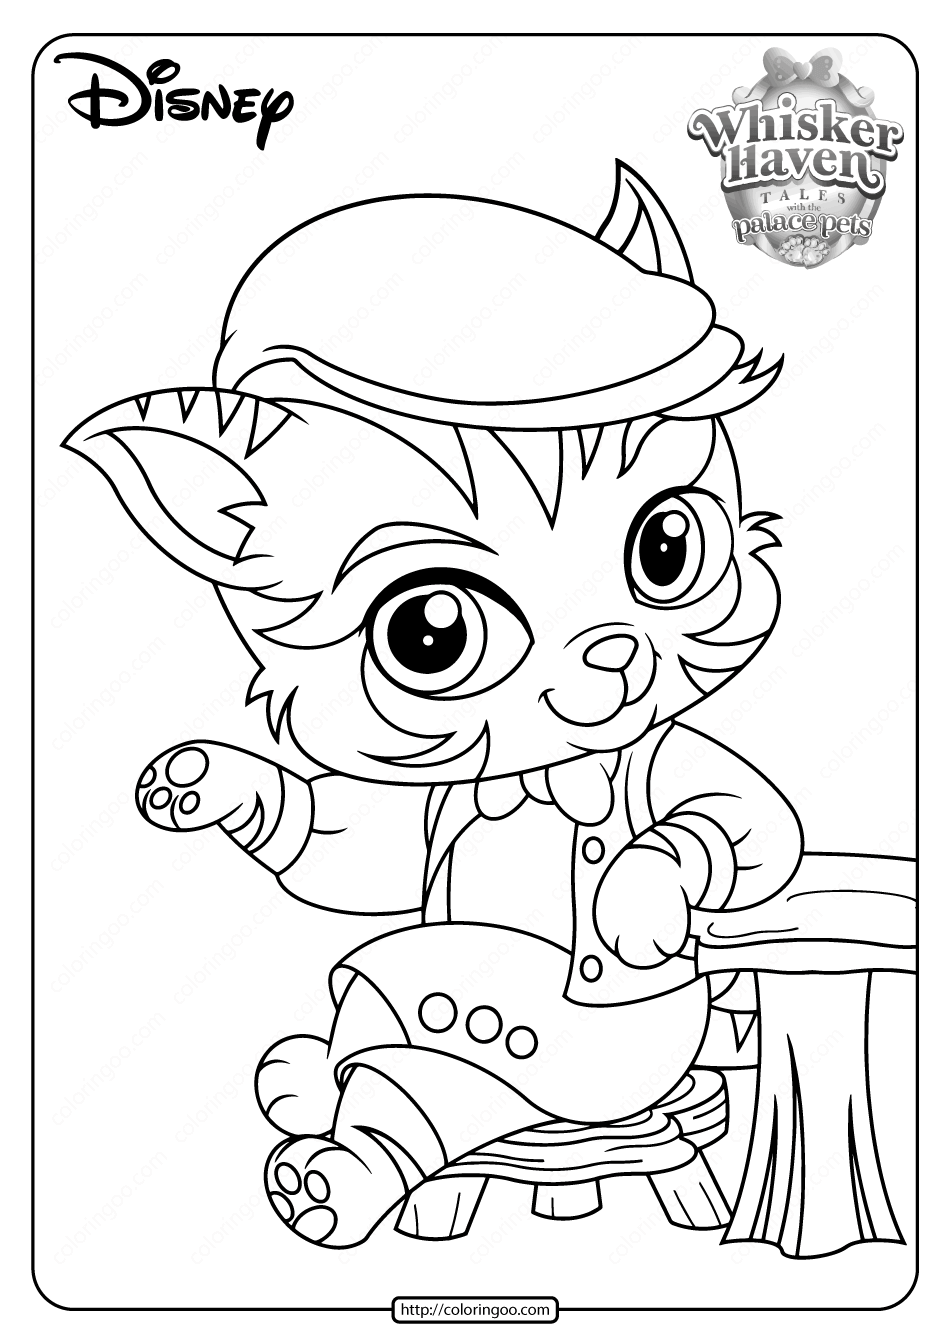 printable palace pets barnaby pickles pdf coloring page